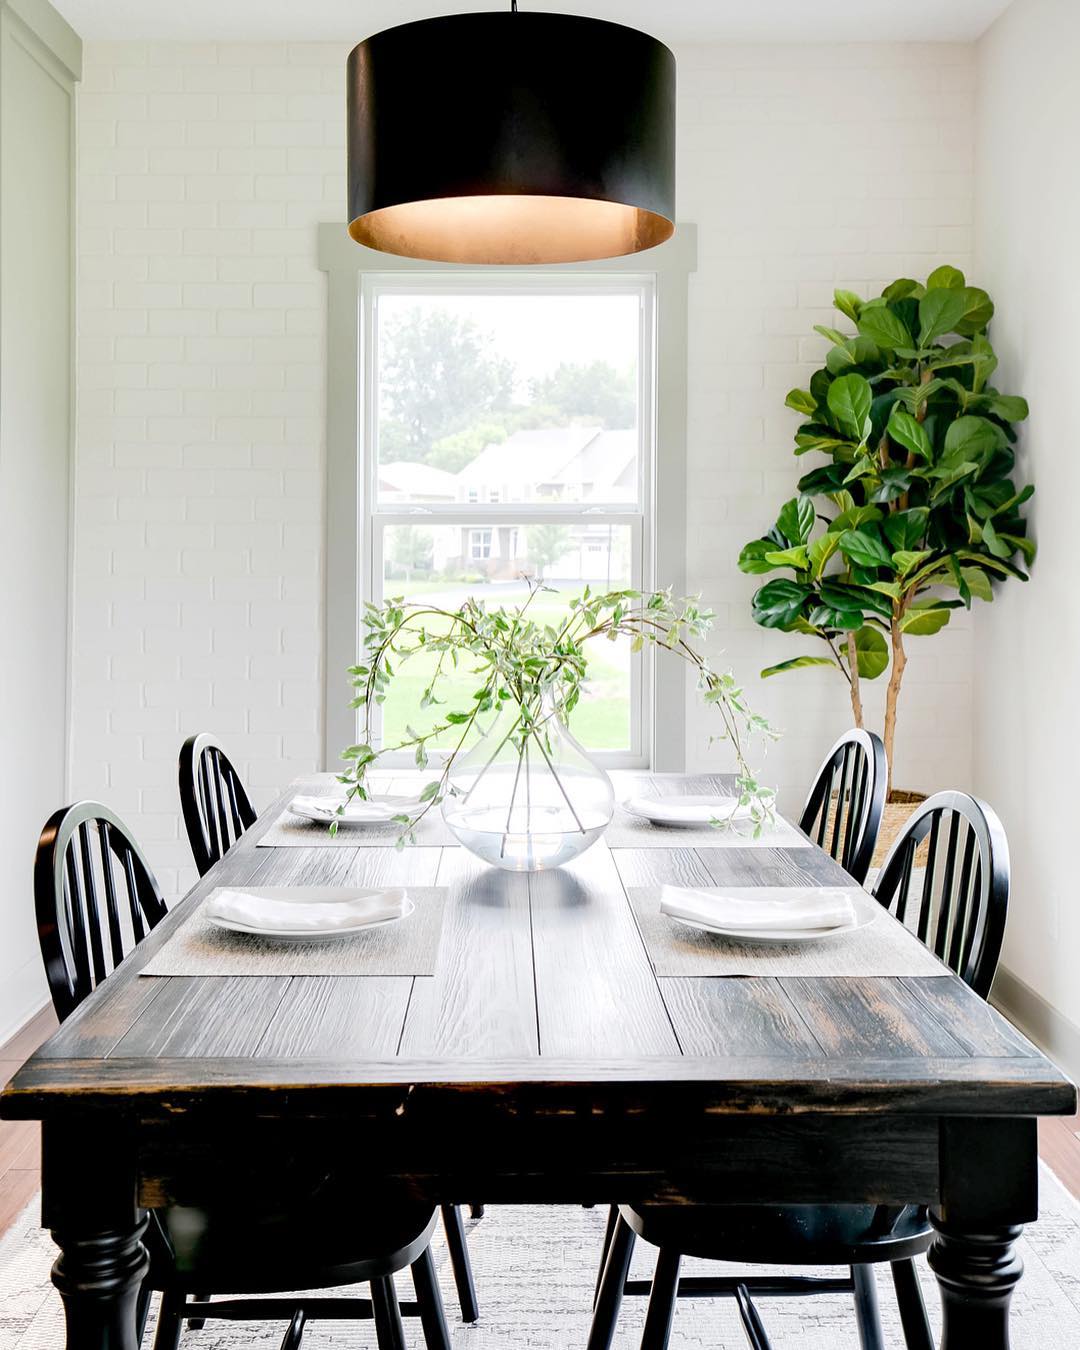 Dining Room with Reclaimed Wood Dining Set. Photo by Instagram user @jfuerstphoto